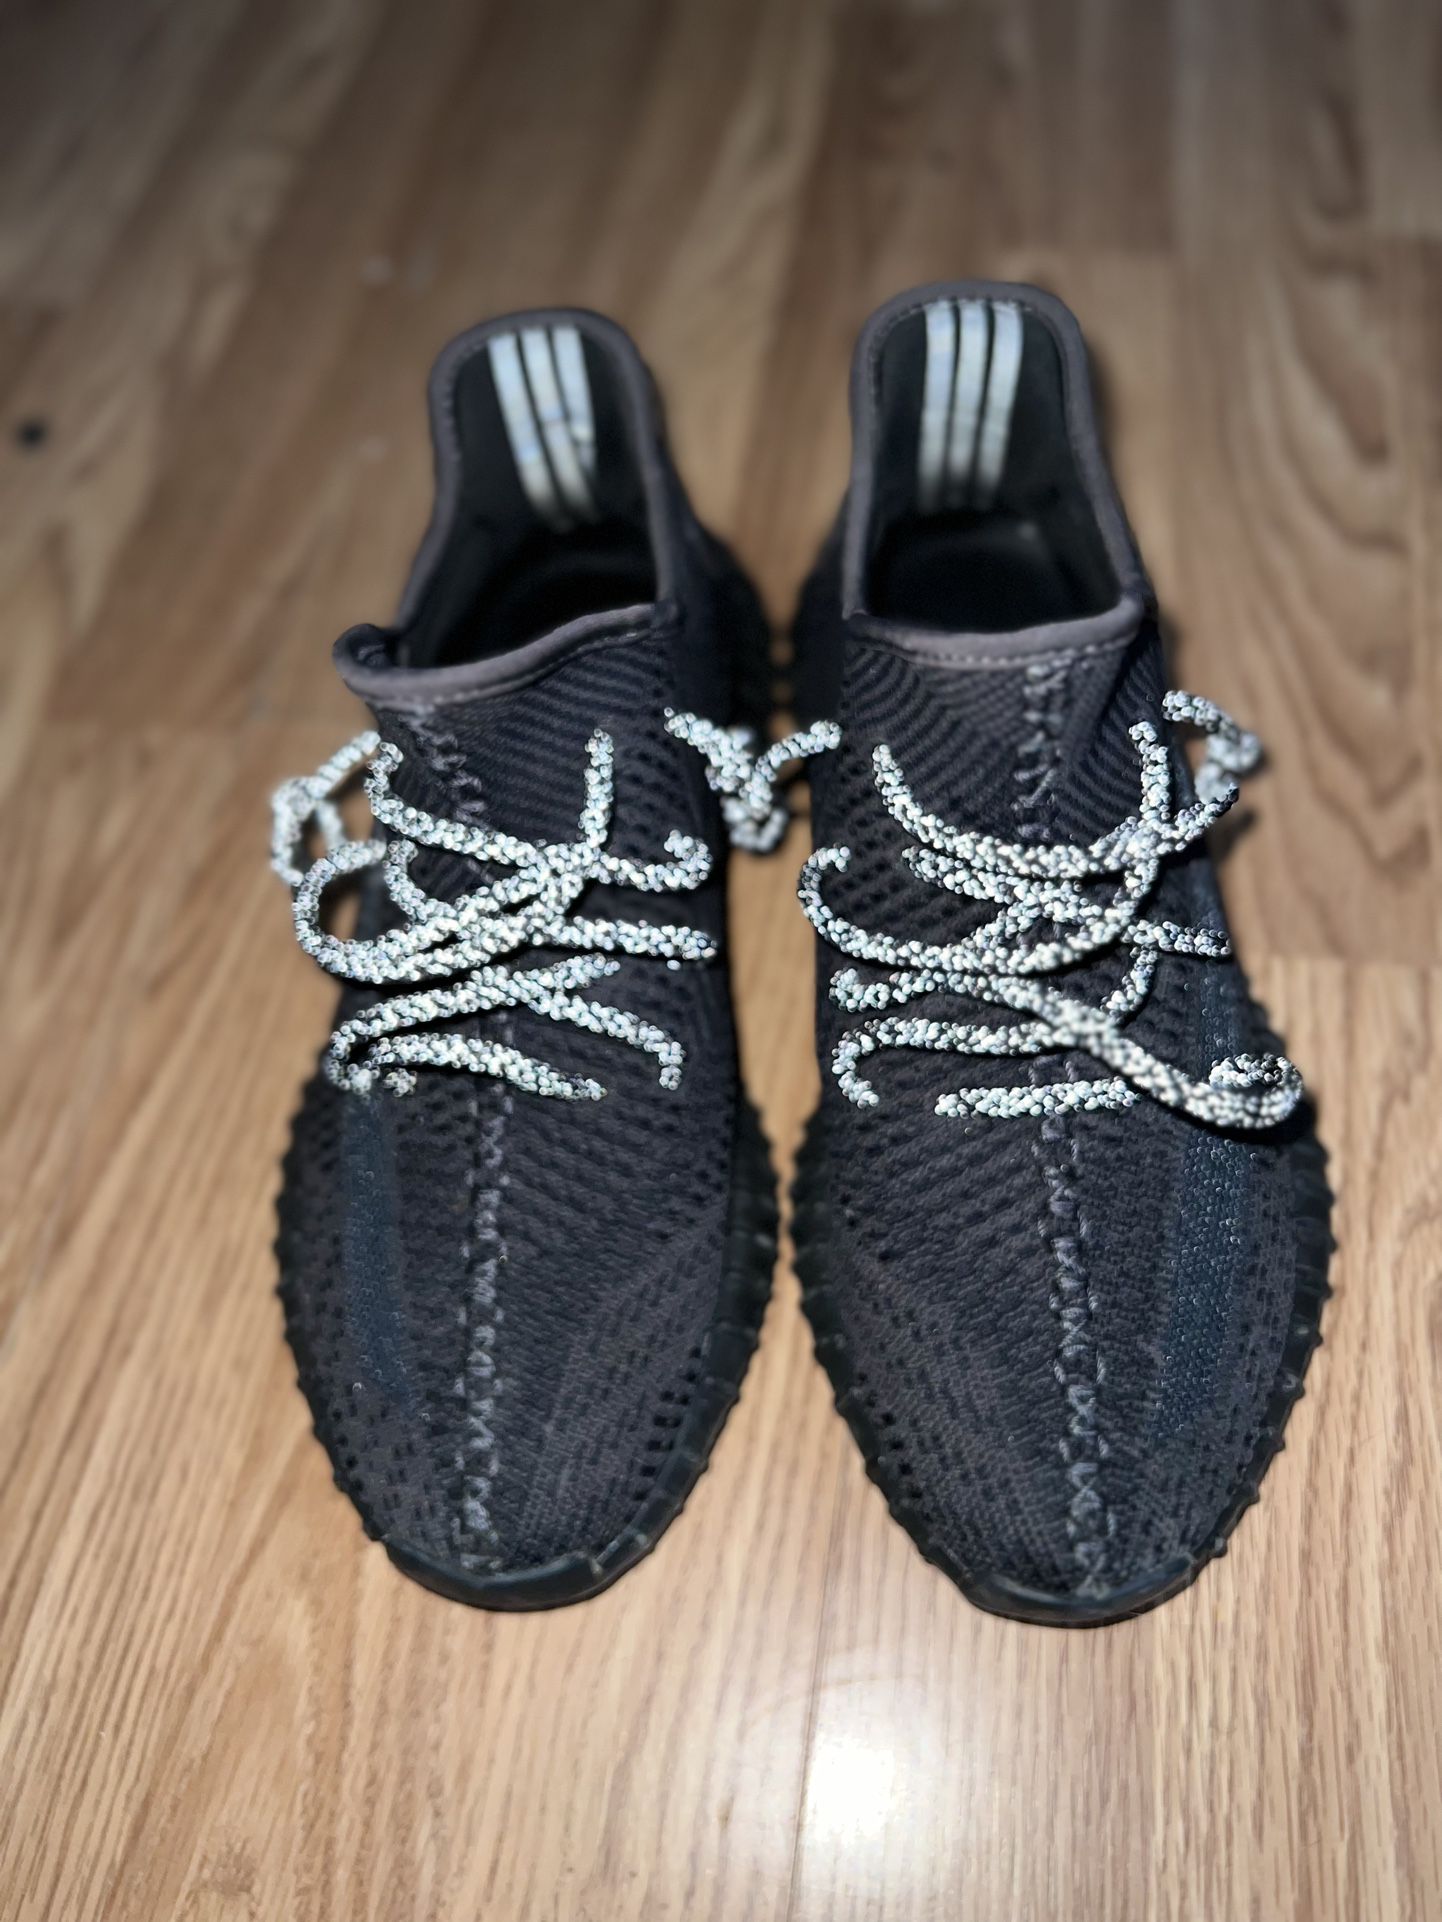 Adidas Boost 350 V2 (static Black Reflective) for Sale in Bear Creek Village, PA -